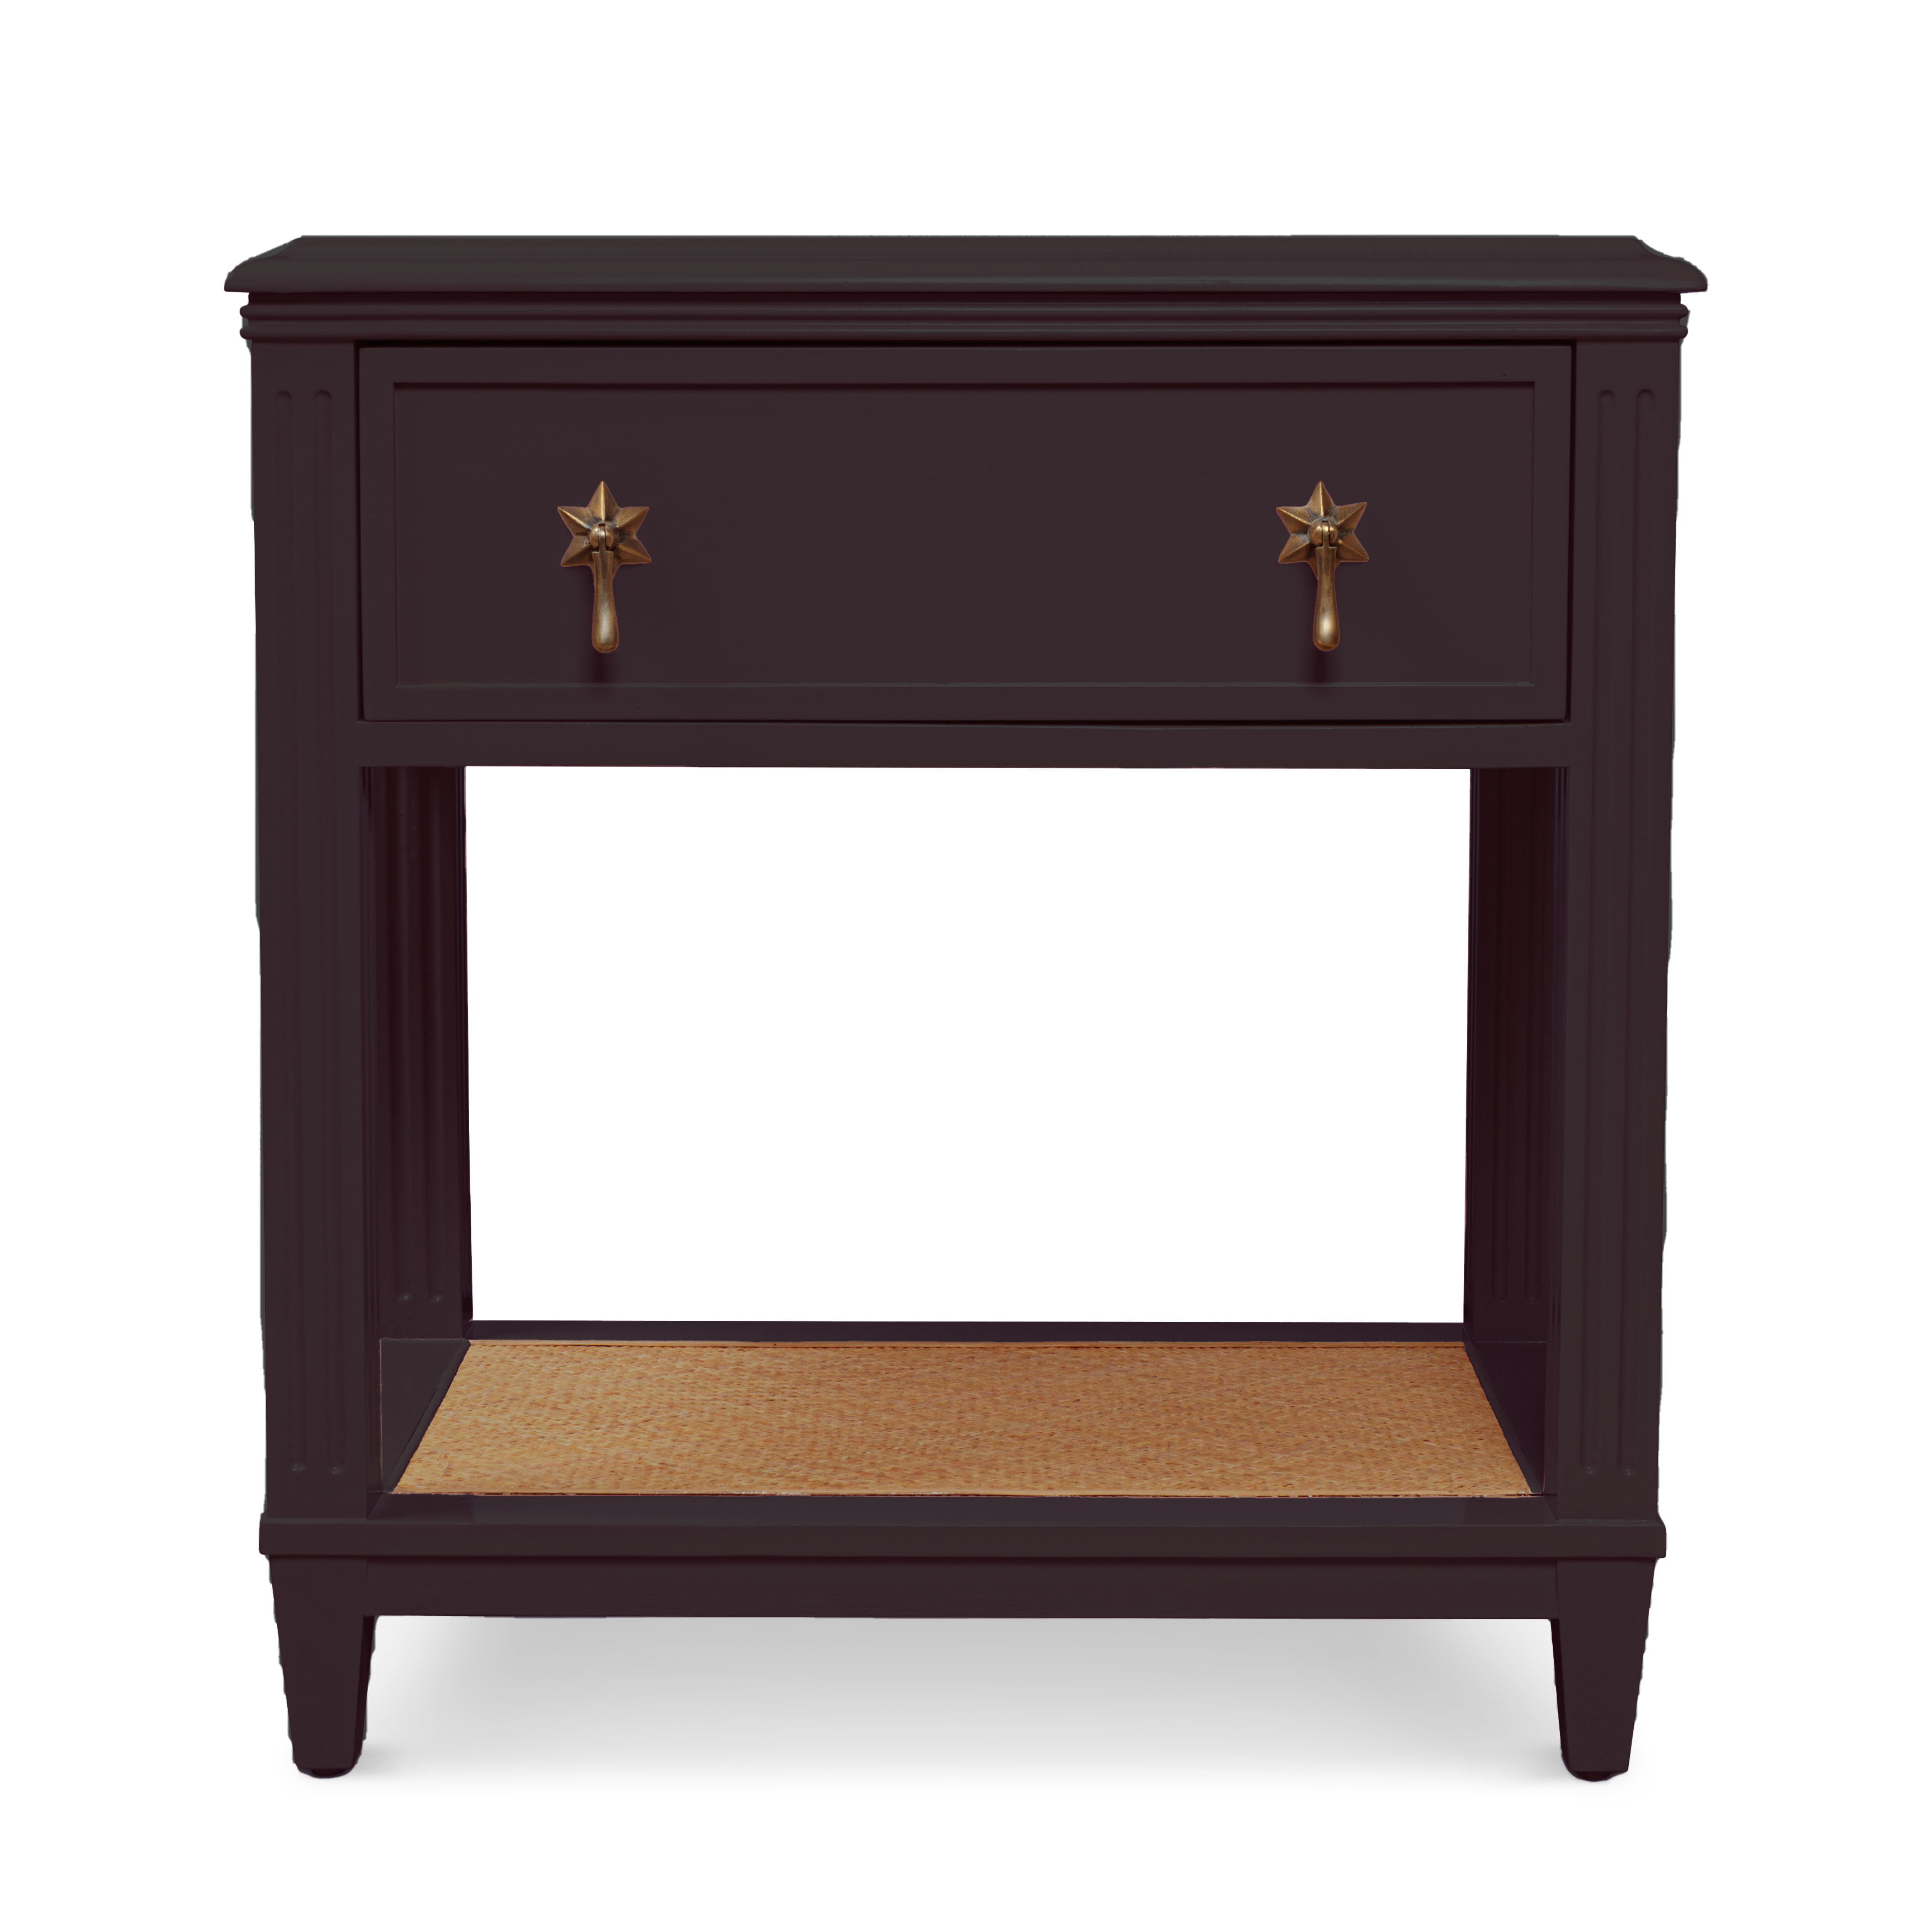 A dark purple bedside table with star-shaped handles.